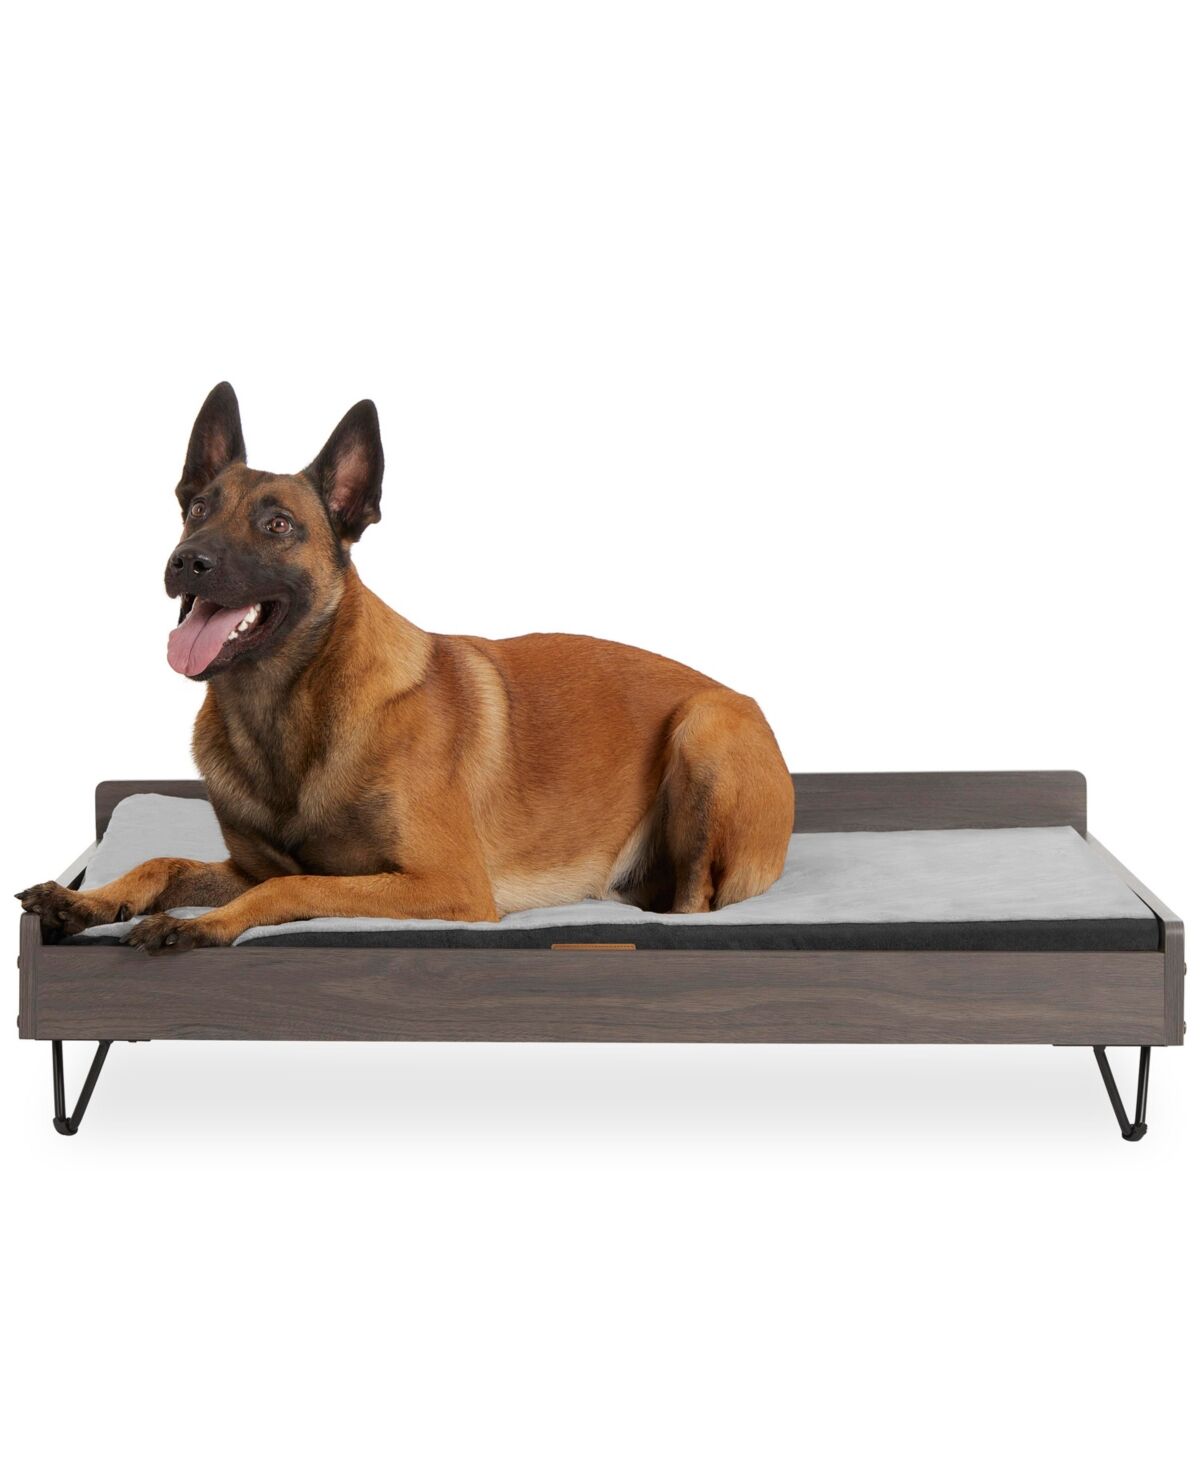 TailZzz Chase Wooden Pet Bed with Mattress   Large to Extra Large Pet Bed with Mattress   Elevated Pet Bed   Water-resistant Pet Mattress   Greenguard